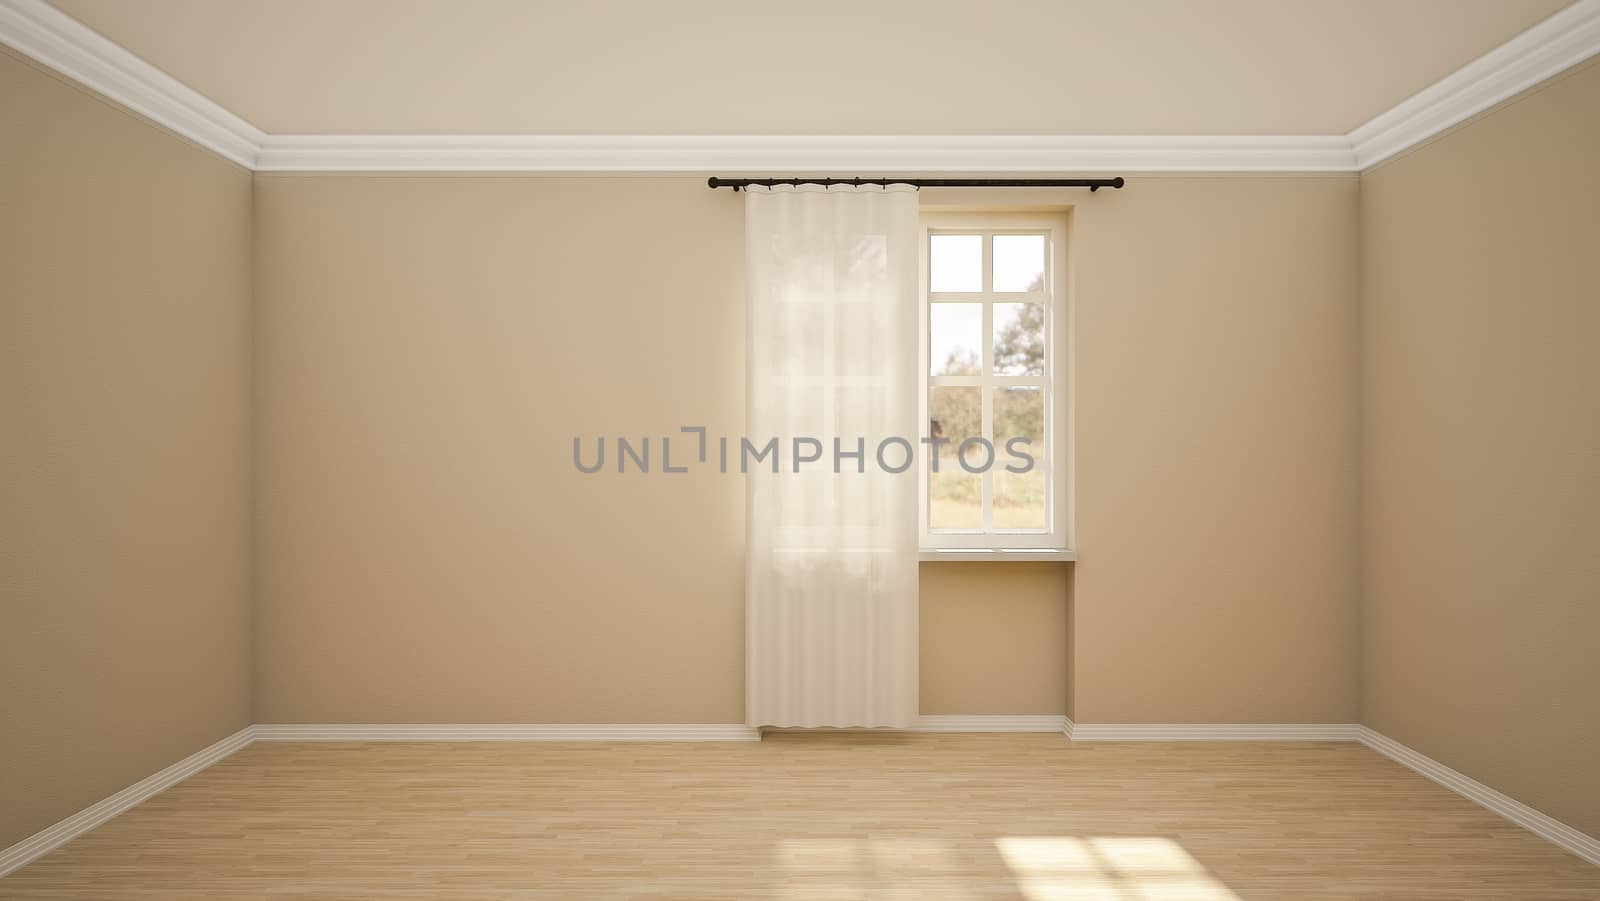 The interior design of empty room and living room modern style with window and wooden floor. 3d Render by anotestocker